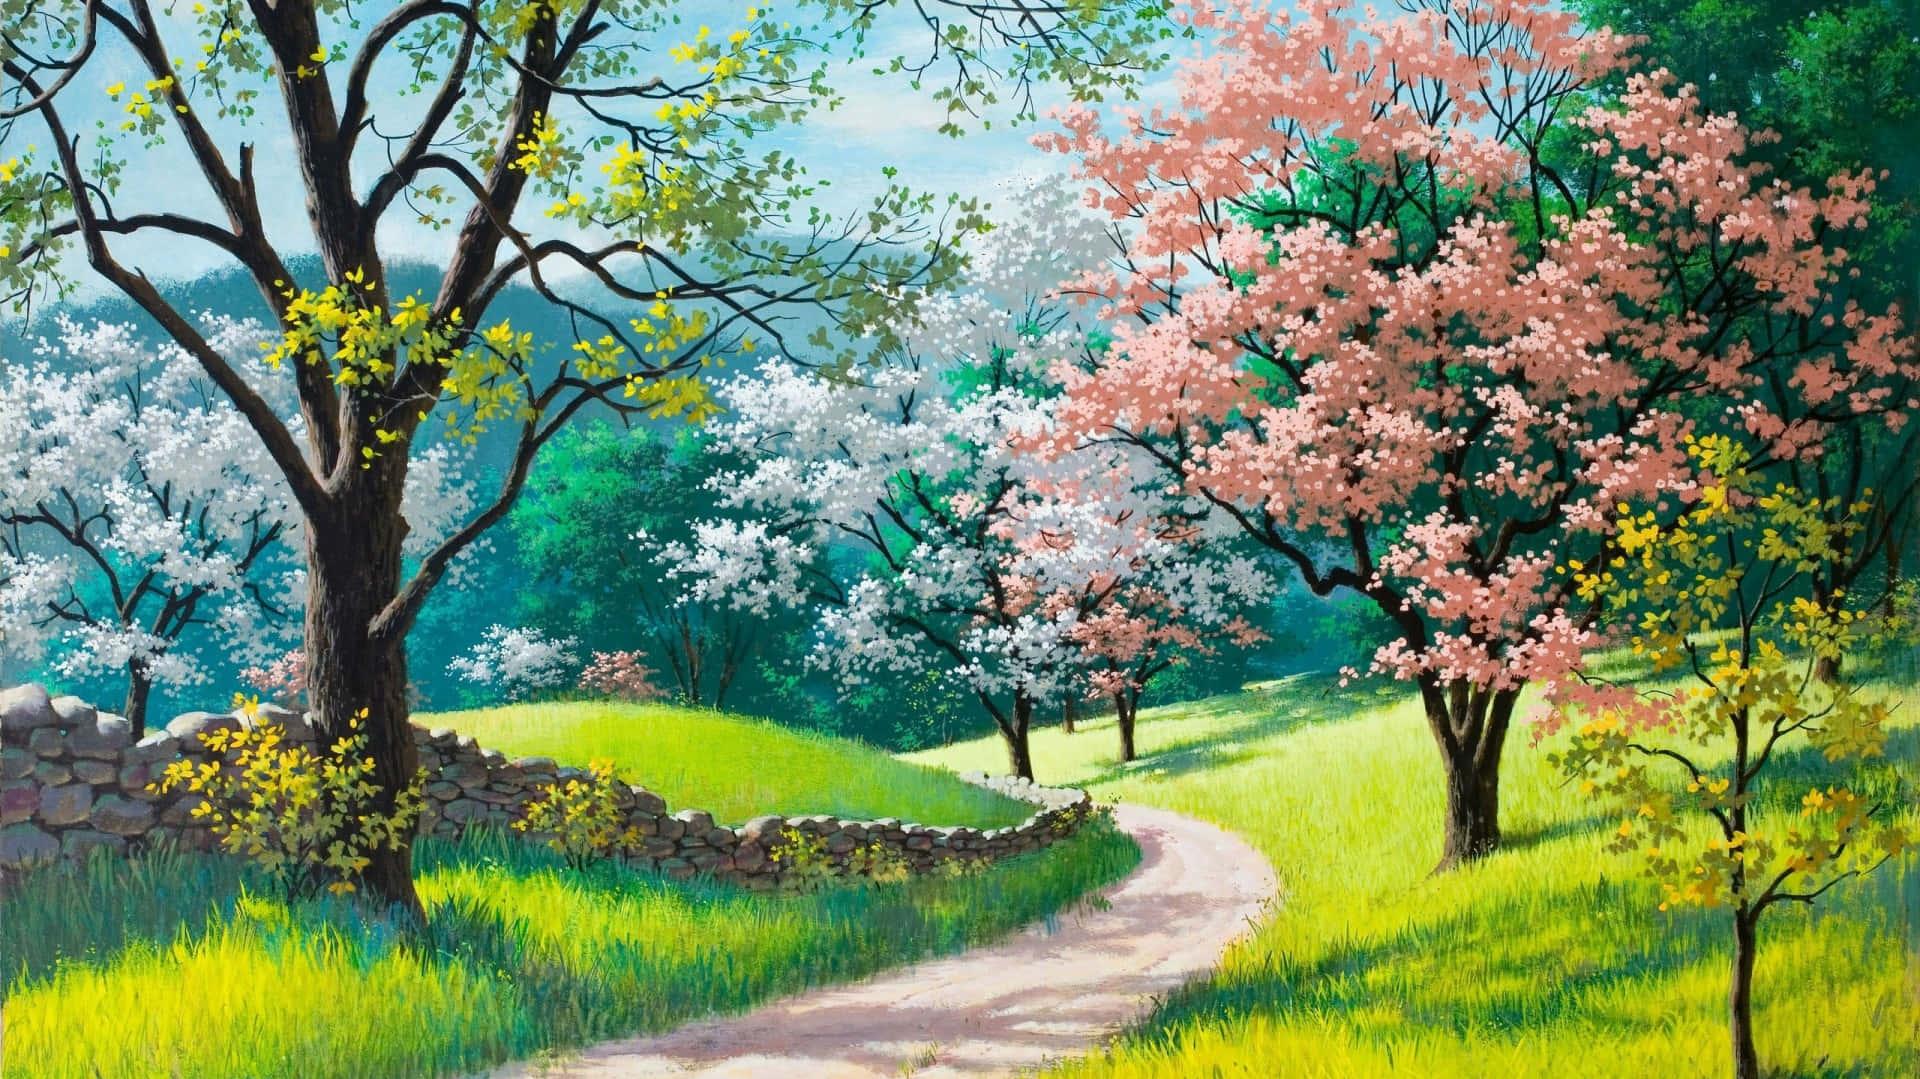 A Painting Of Road With Trees And Flowers Wallpaper